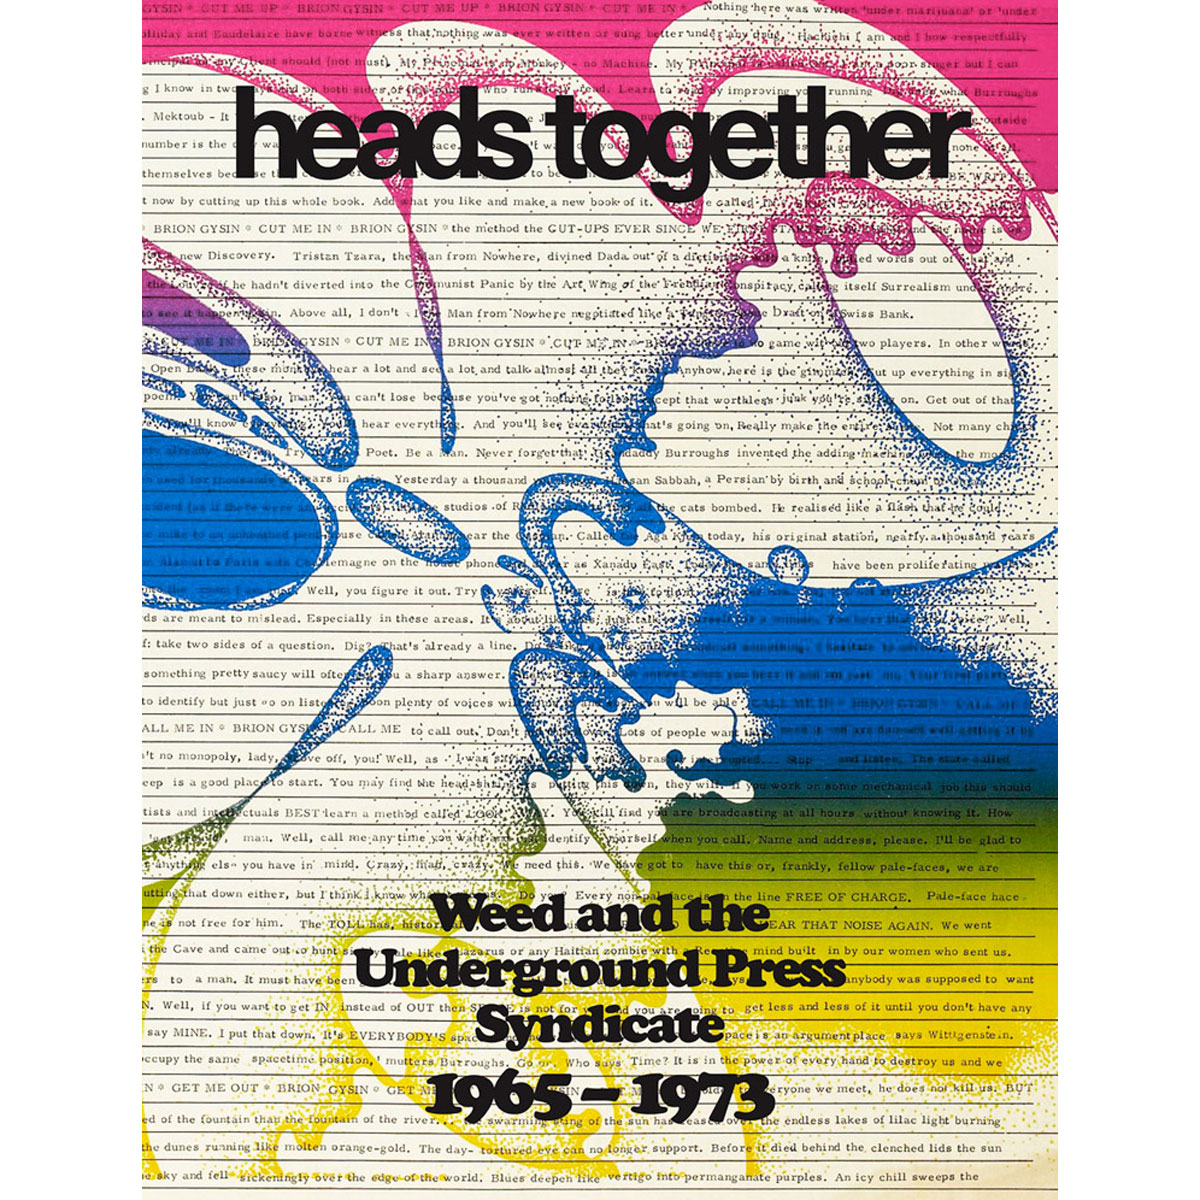 Heads Together. Weed and the Underground Press Syndicate 1965 1973